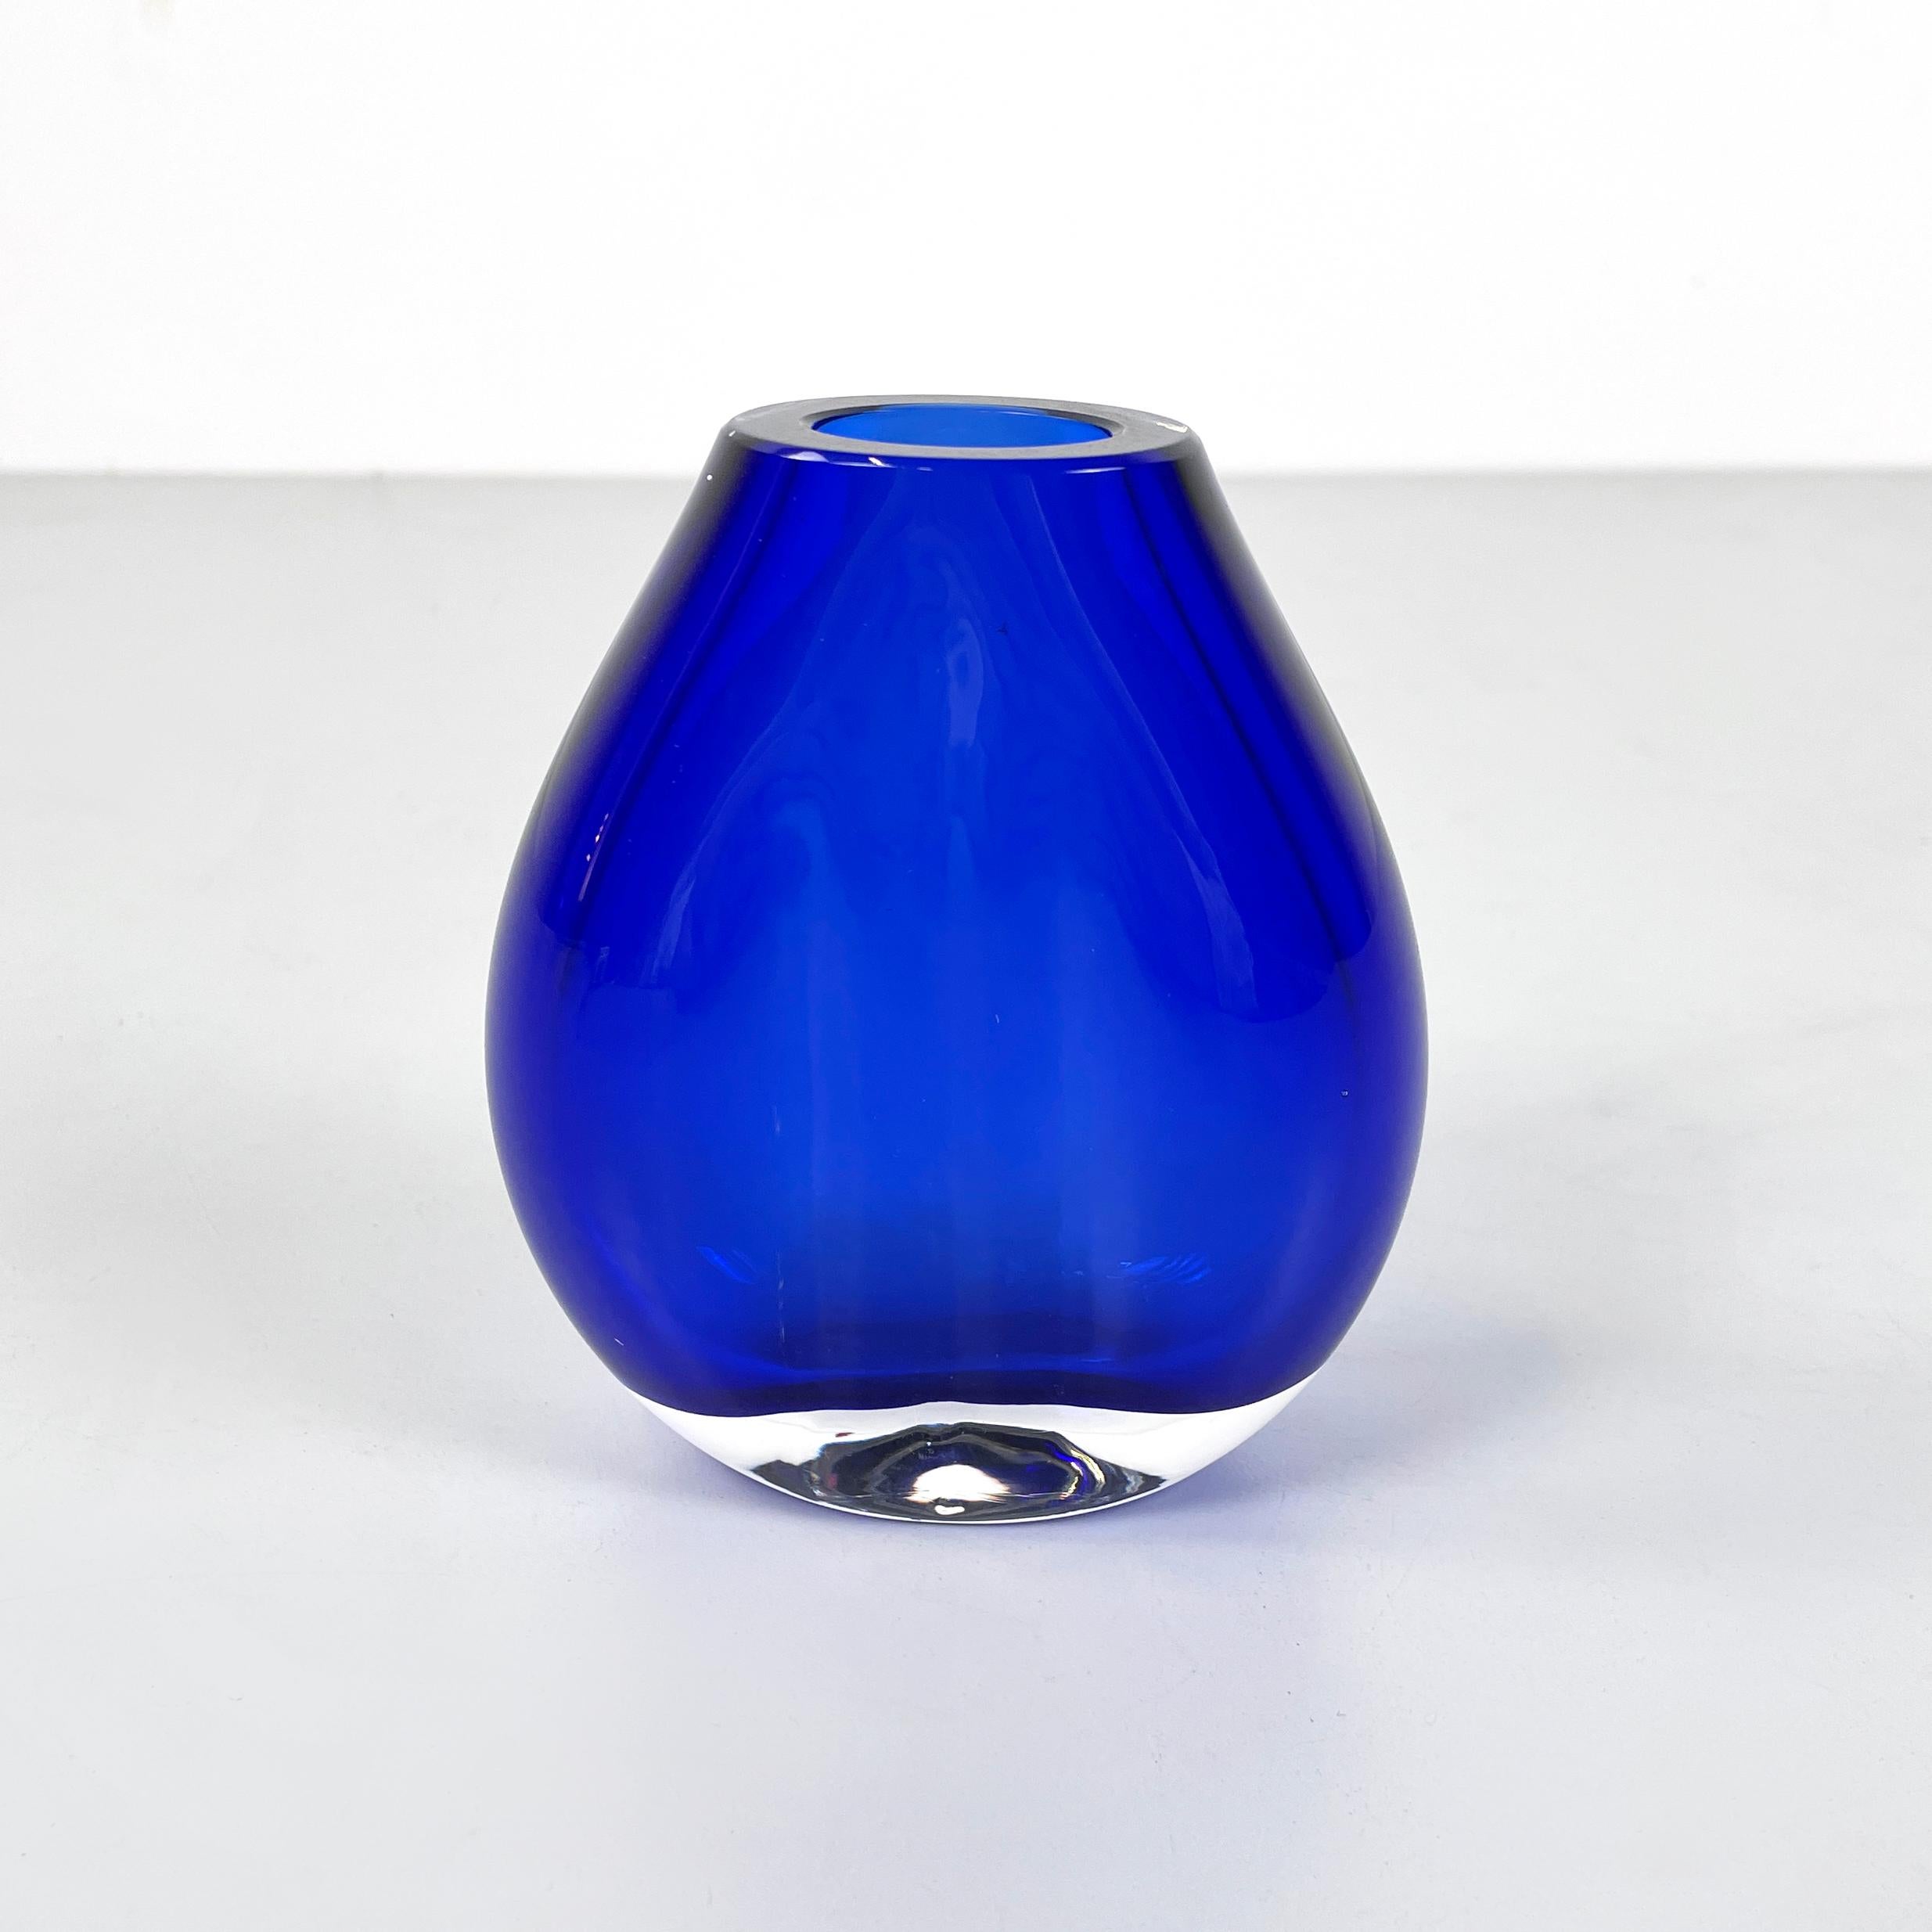 Italian modern Round vase in transparent and blue Murano glass by Venini 1990s
Vase with an oval base in thick blue and transparent Murano glass. At the top it has an oval hole. The structure widens and then narrows on the sides and remains flat in